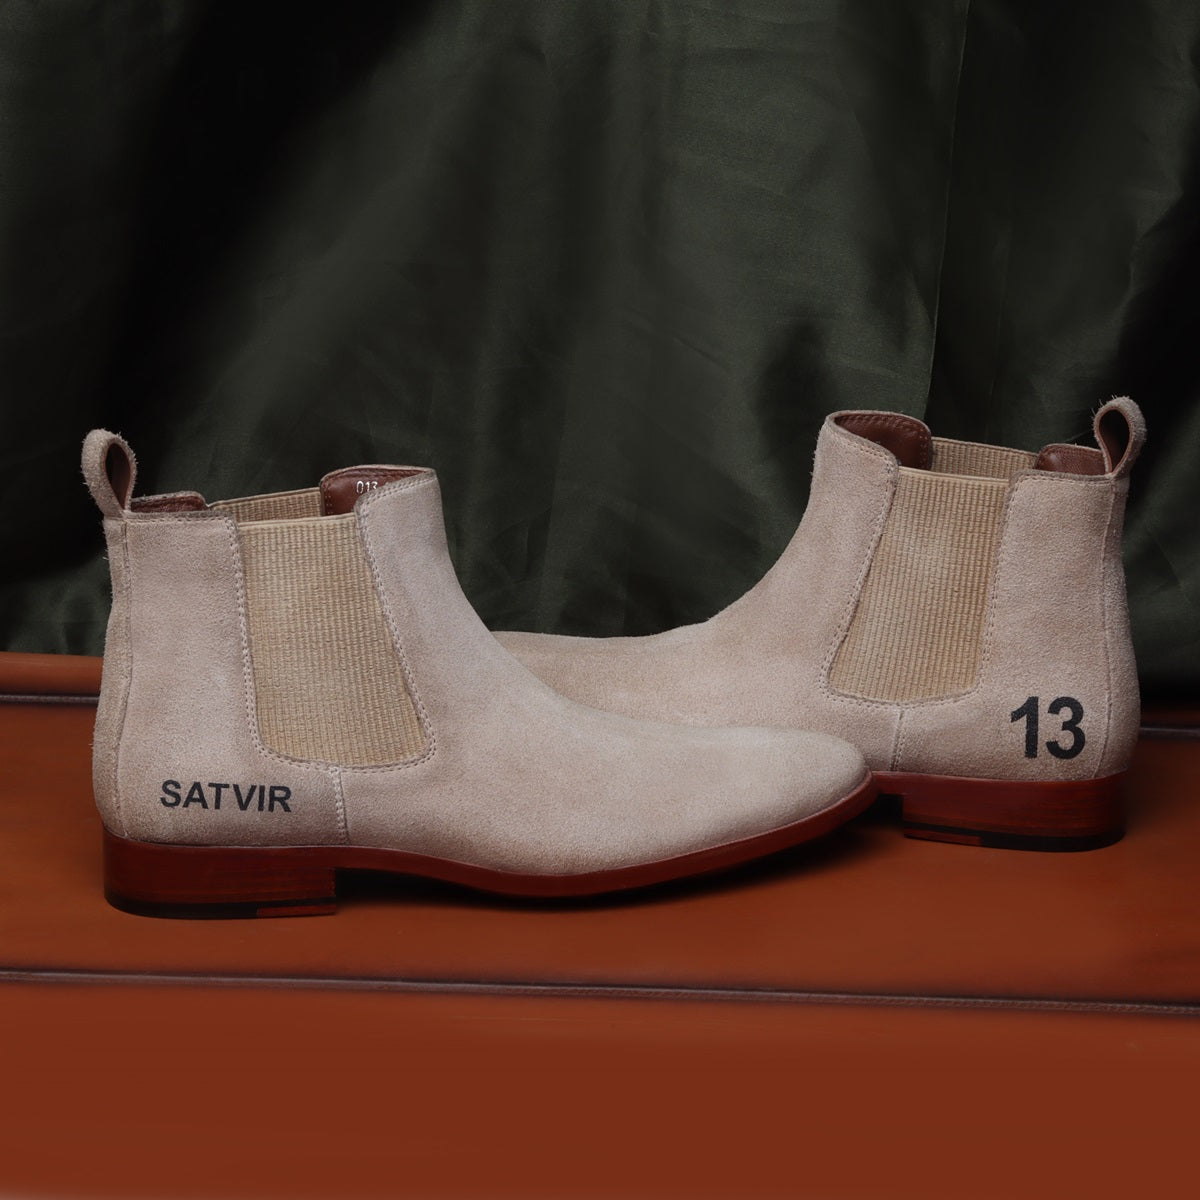 Bespoke Hand-Painted Name Initial Beige Suede Leather Chelsea Boots For Men by Brune & Bareskin